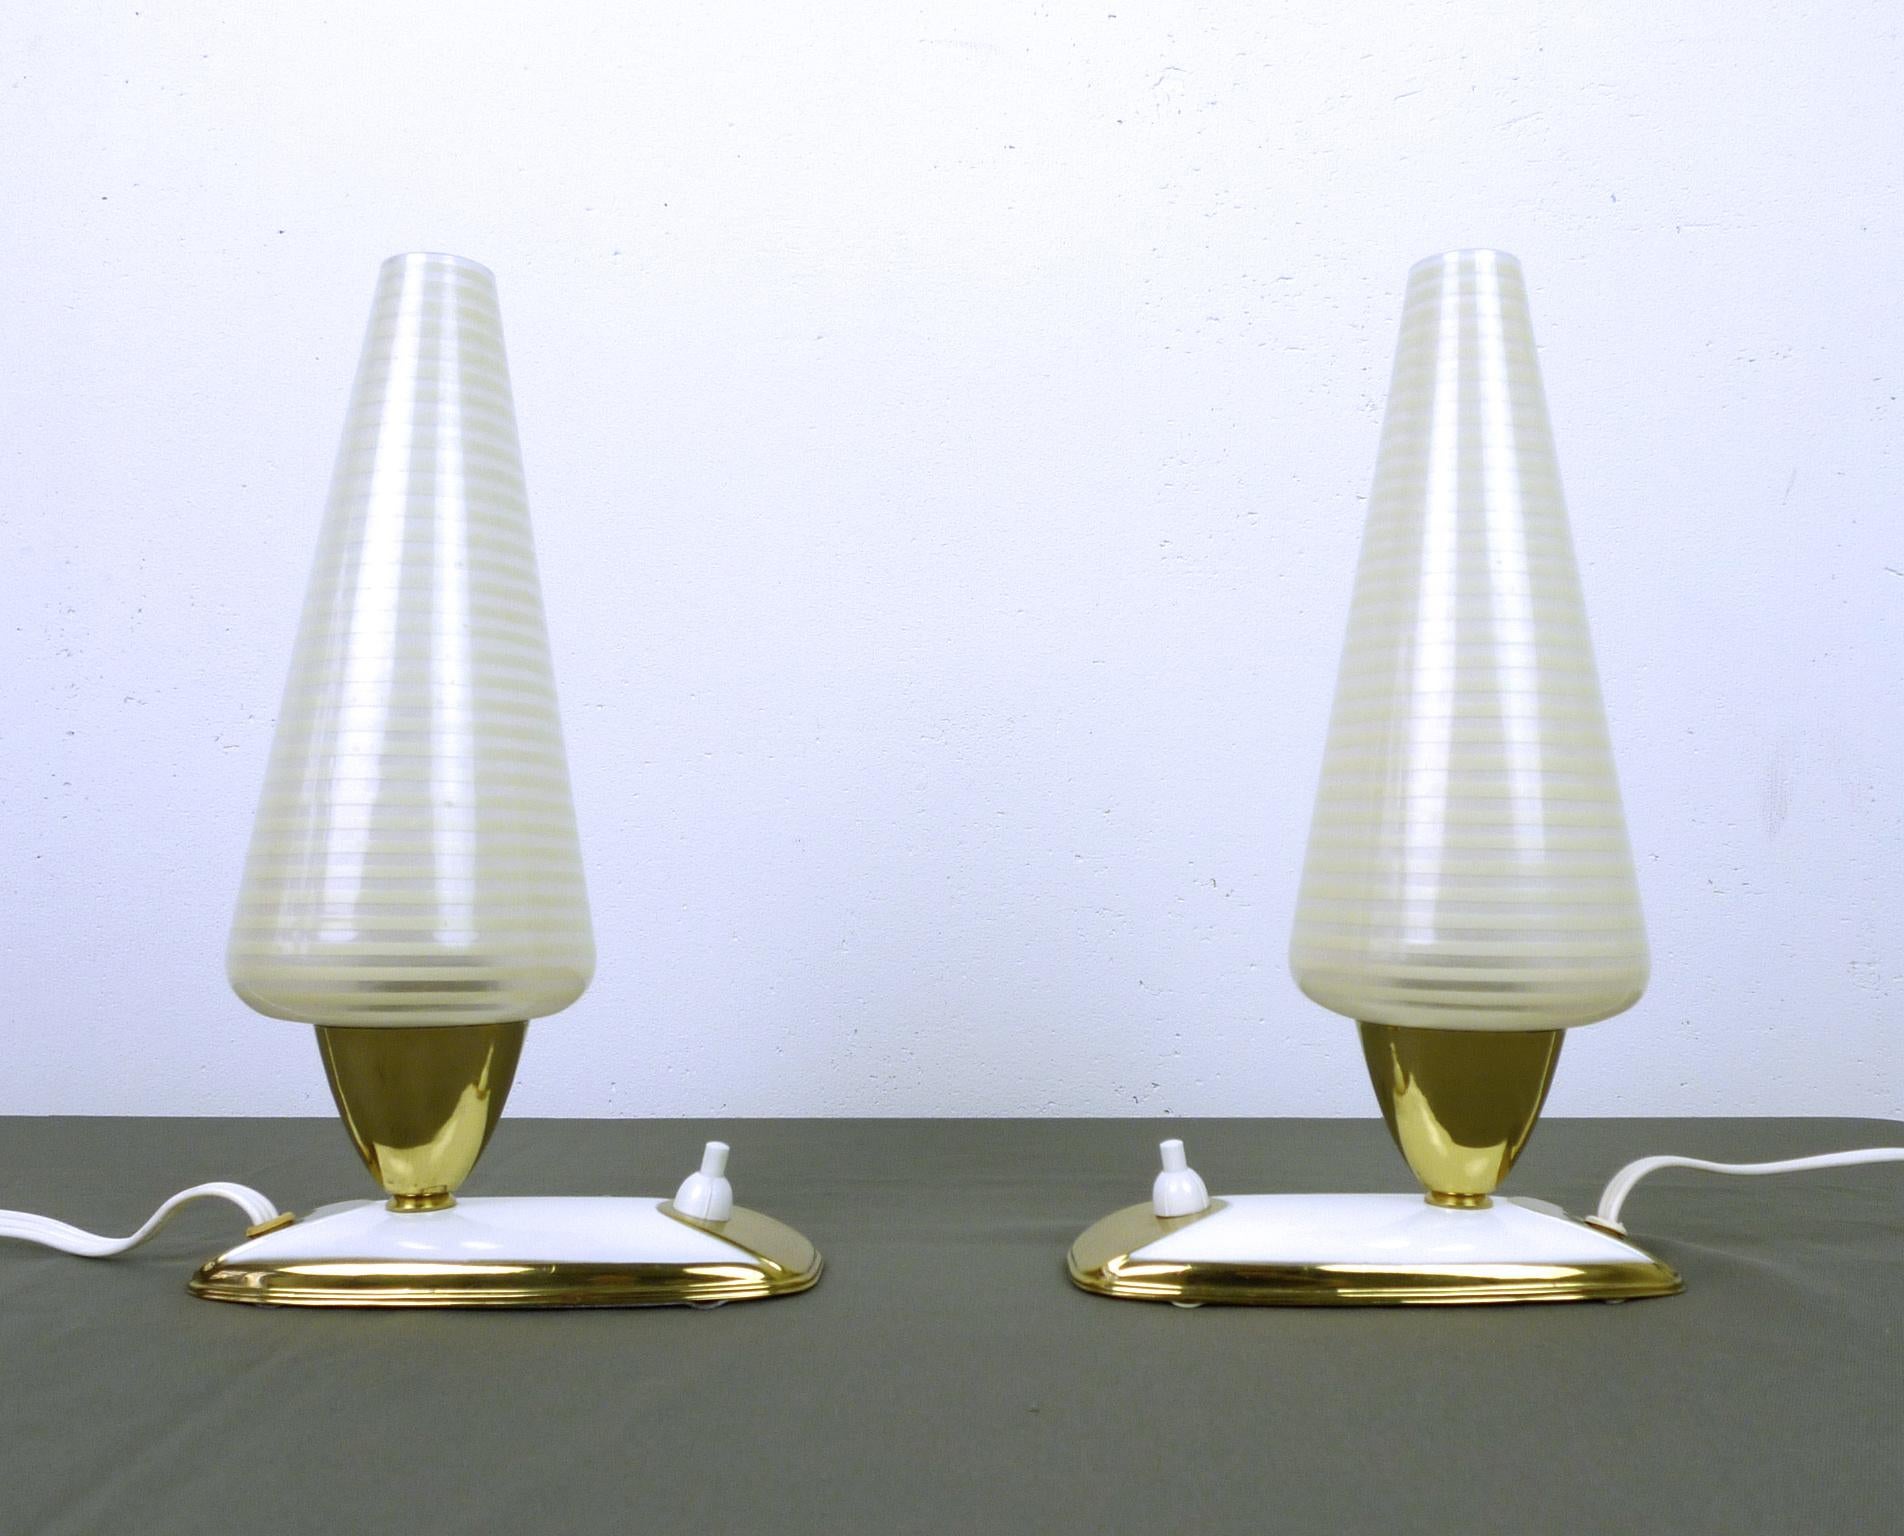 Pair of German table lamps from the 1950s. Both lights have a narrow white stand with brass elements and a pressure switch on the front. The slender striped glass diffusers are stuck on E 14 lamp sockets. The table lamps are in very good condition.